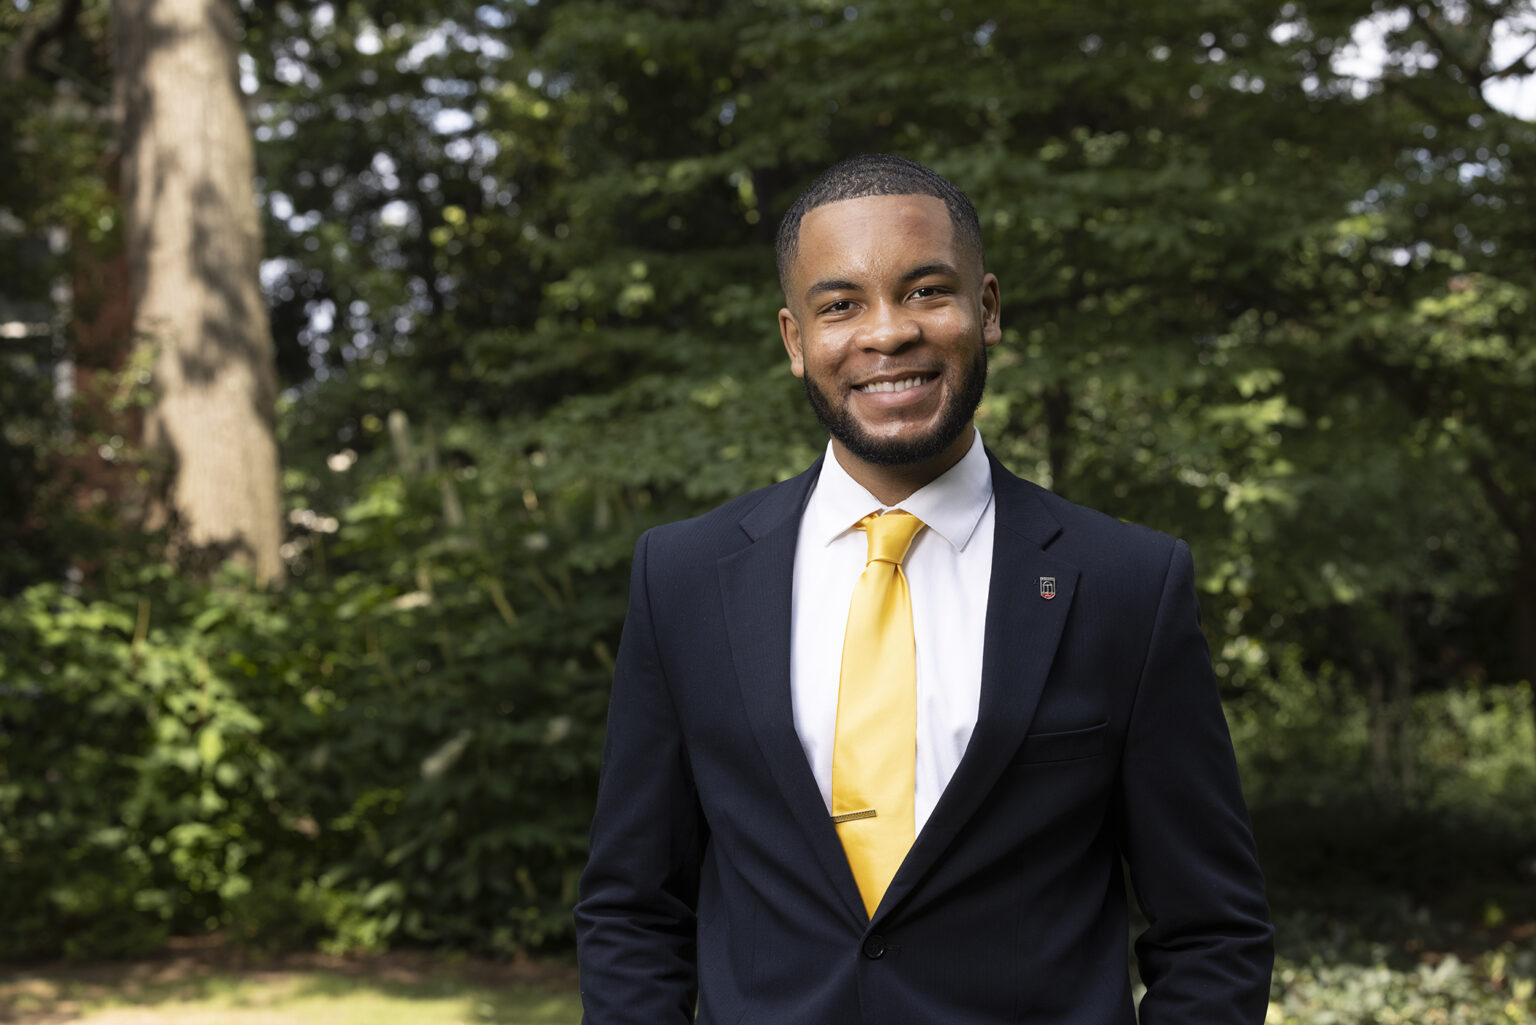 Eric Okanume aims to give a voice to others. A future physician, he takes on leadership roles to advocate for mutual empowerment and ensure college readiness among underrepresented communities.